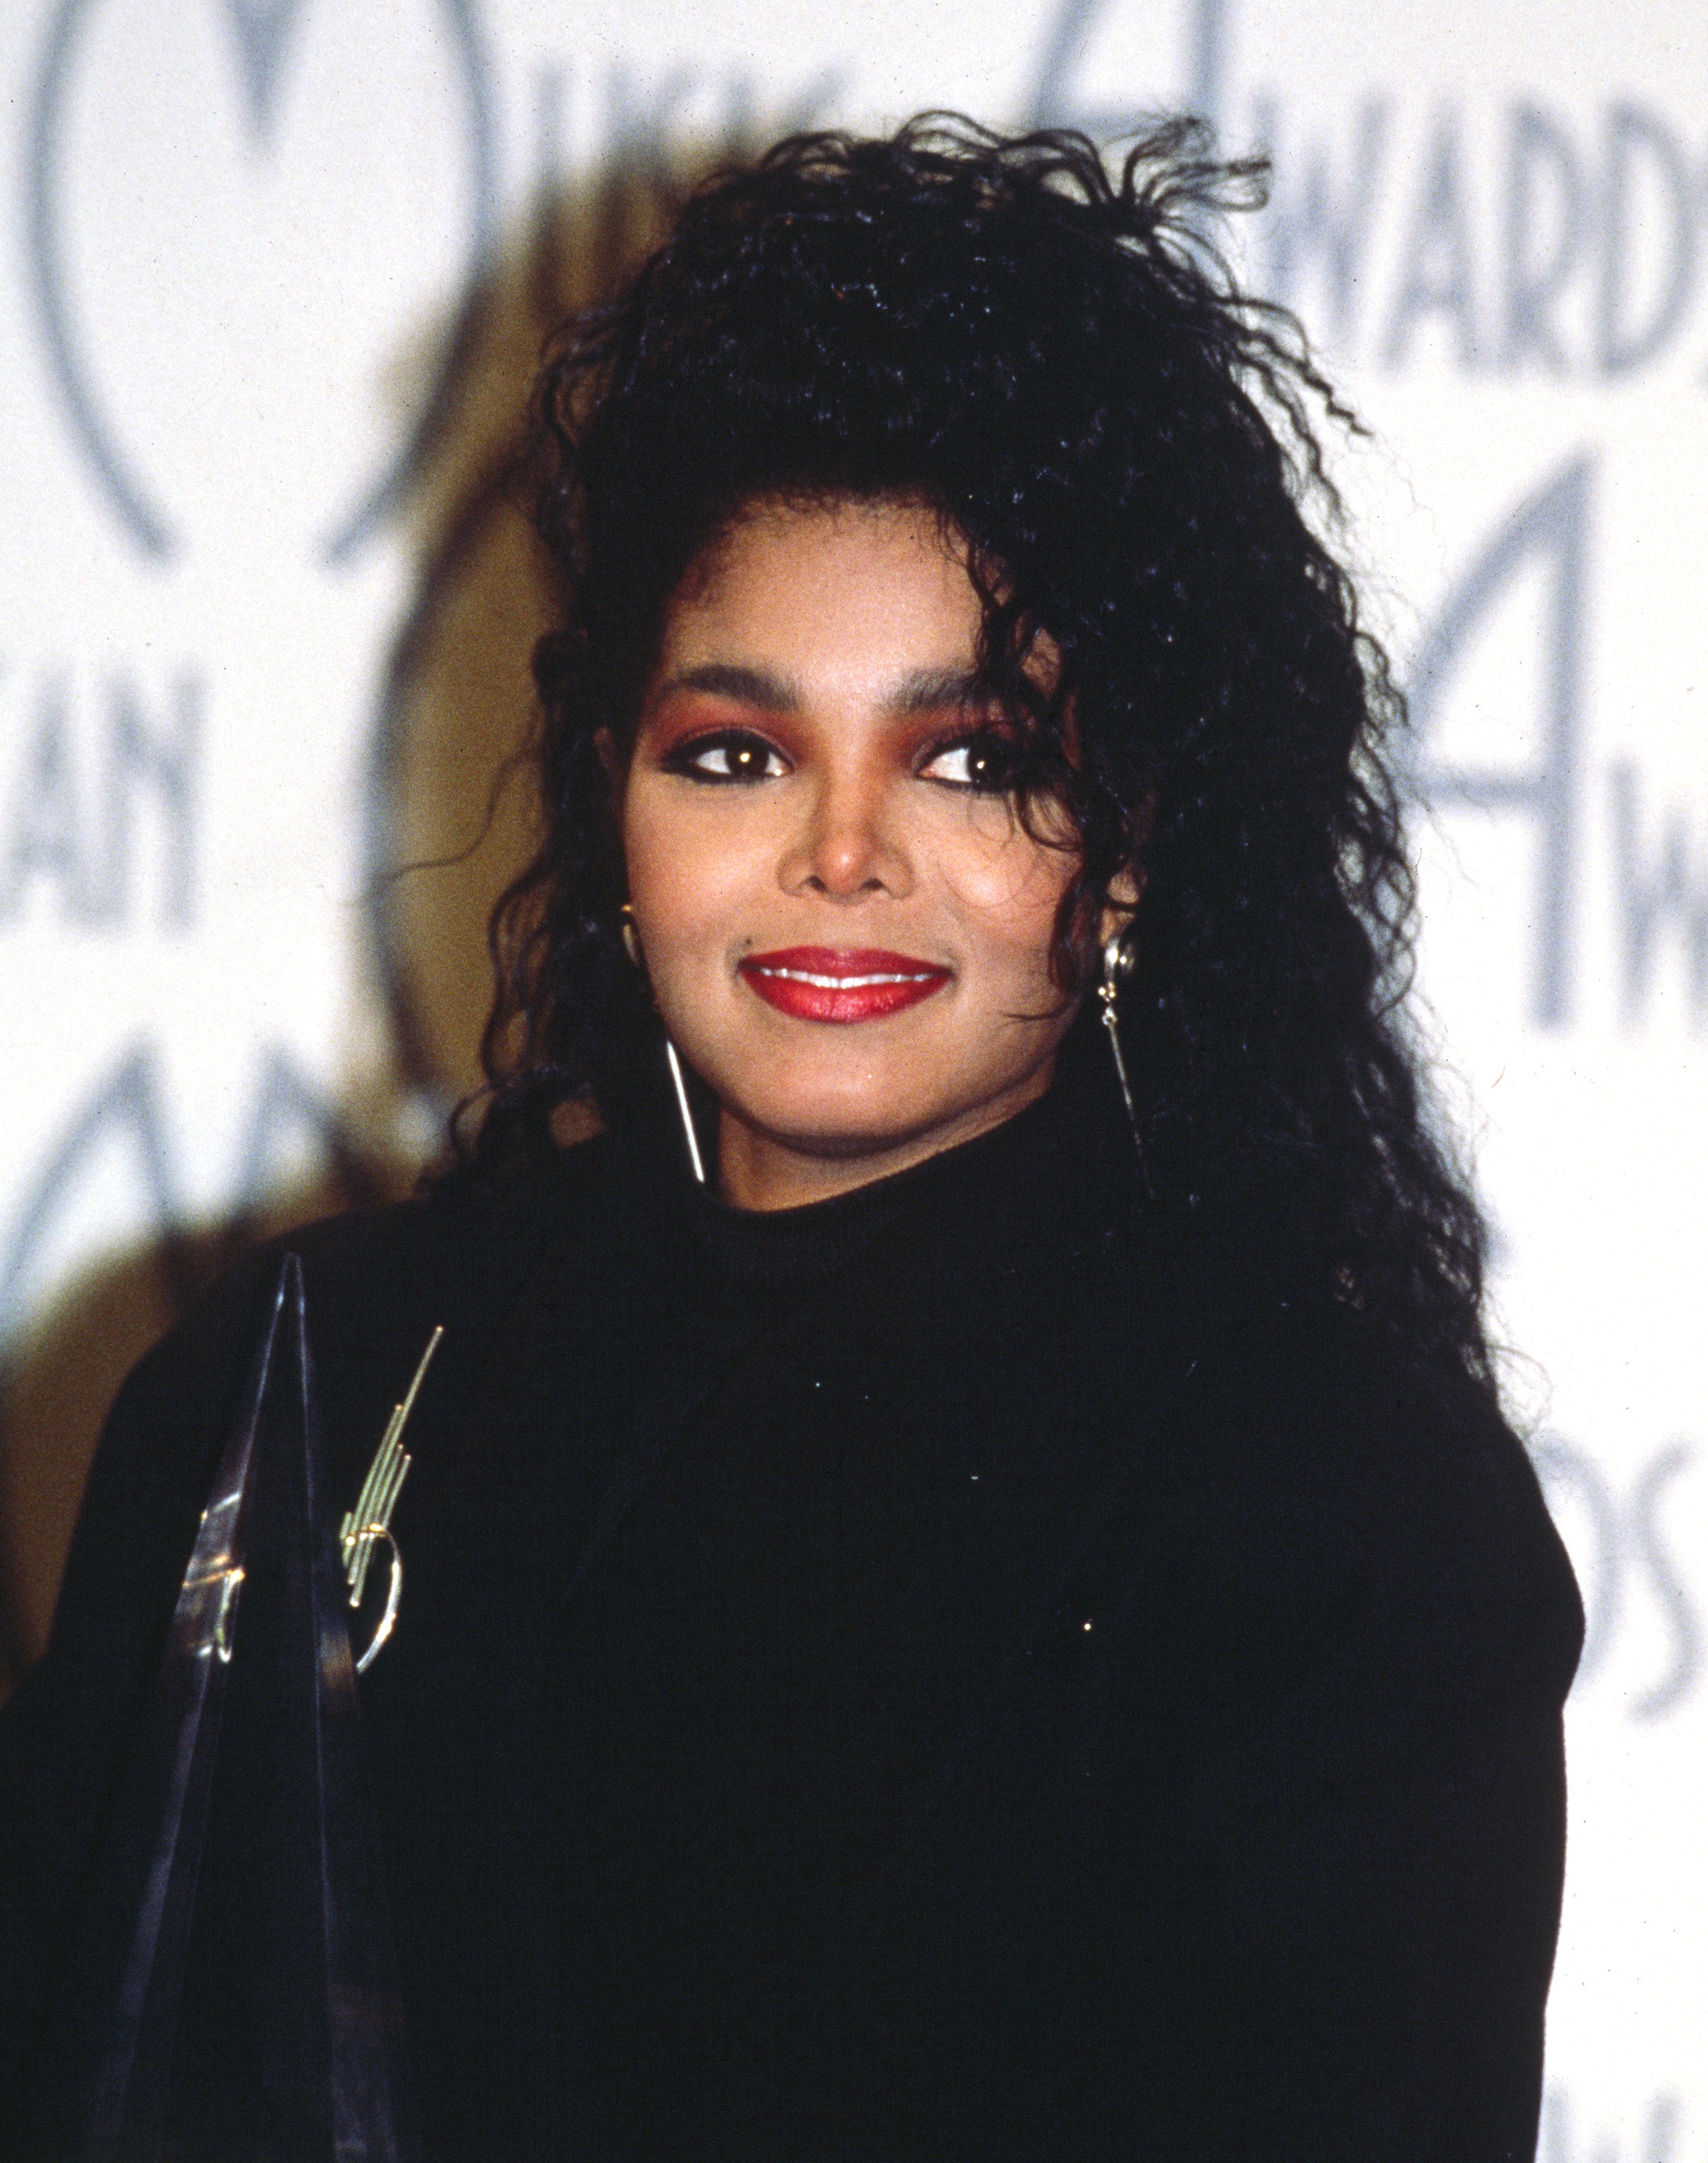 An old photograph of Janet wearing all black